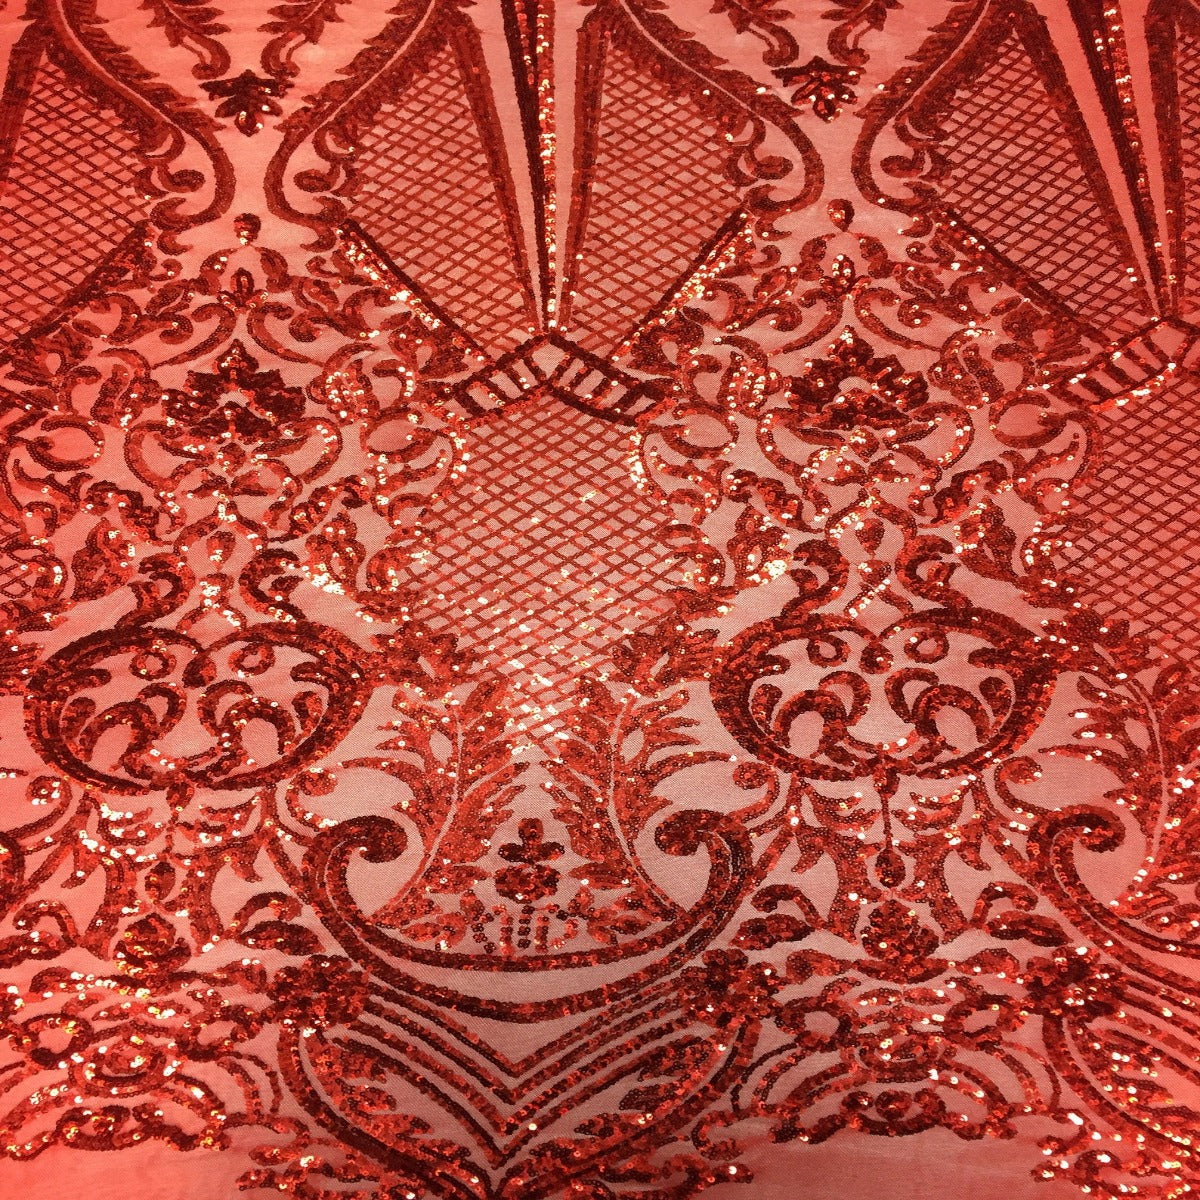 Red Chantal Deluxe Sequins Lace Fabric